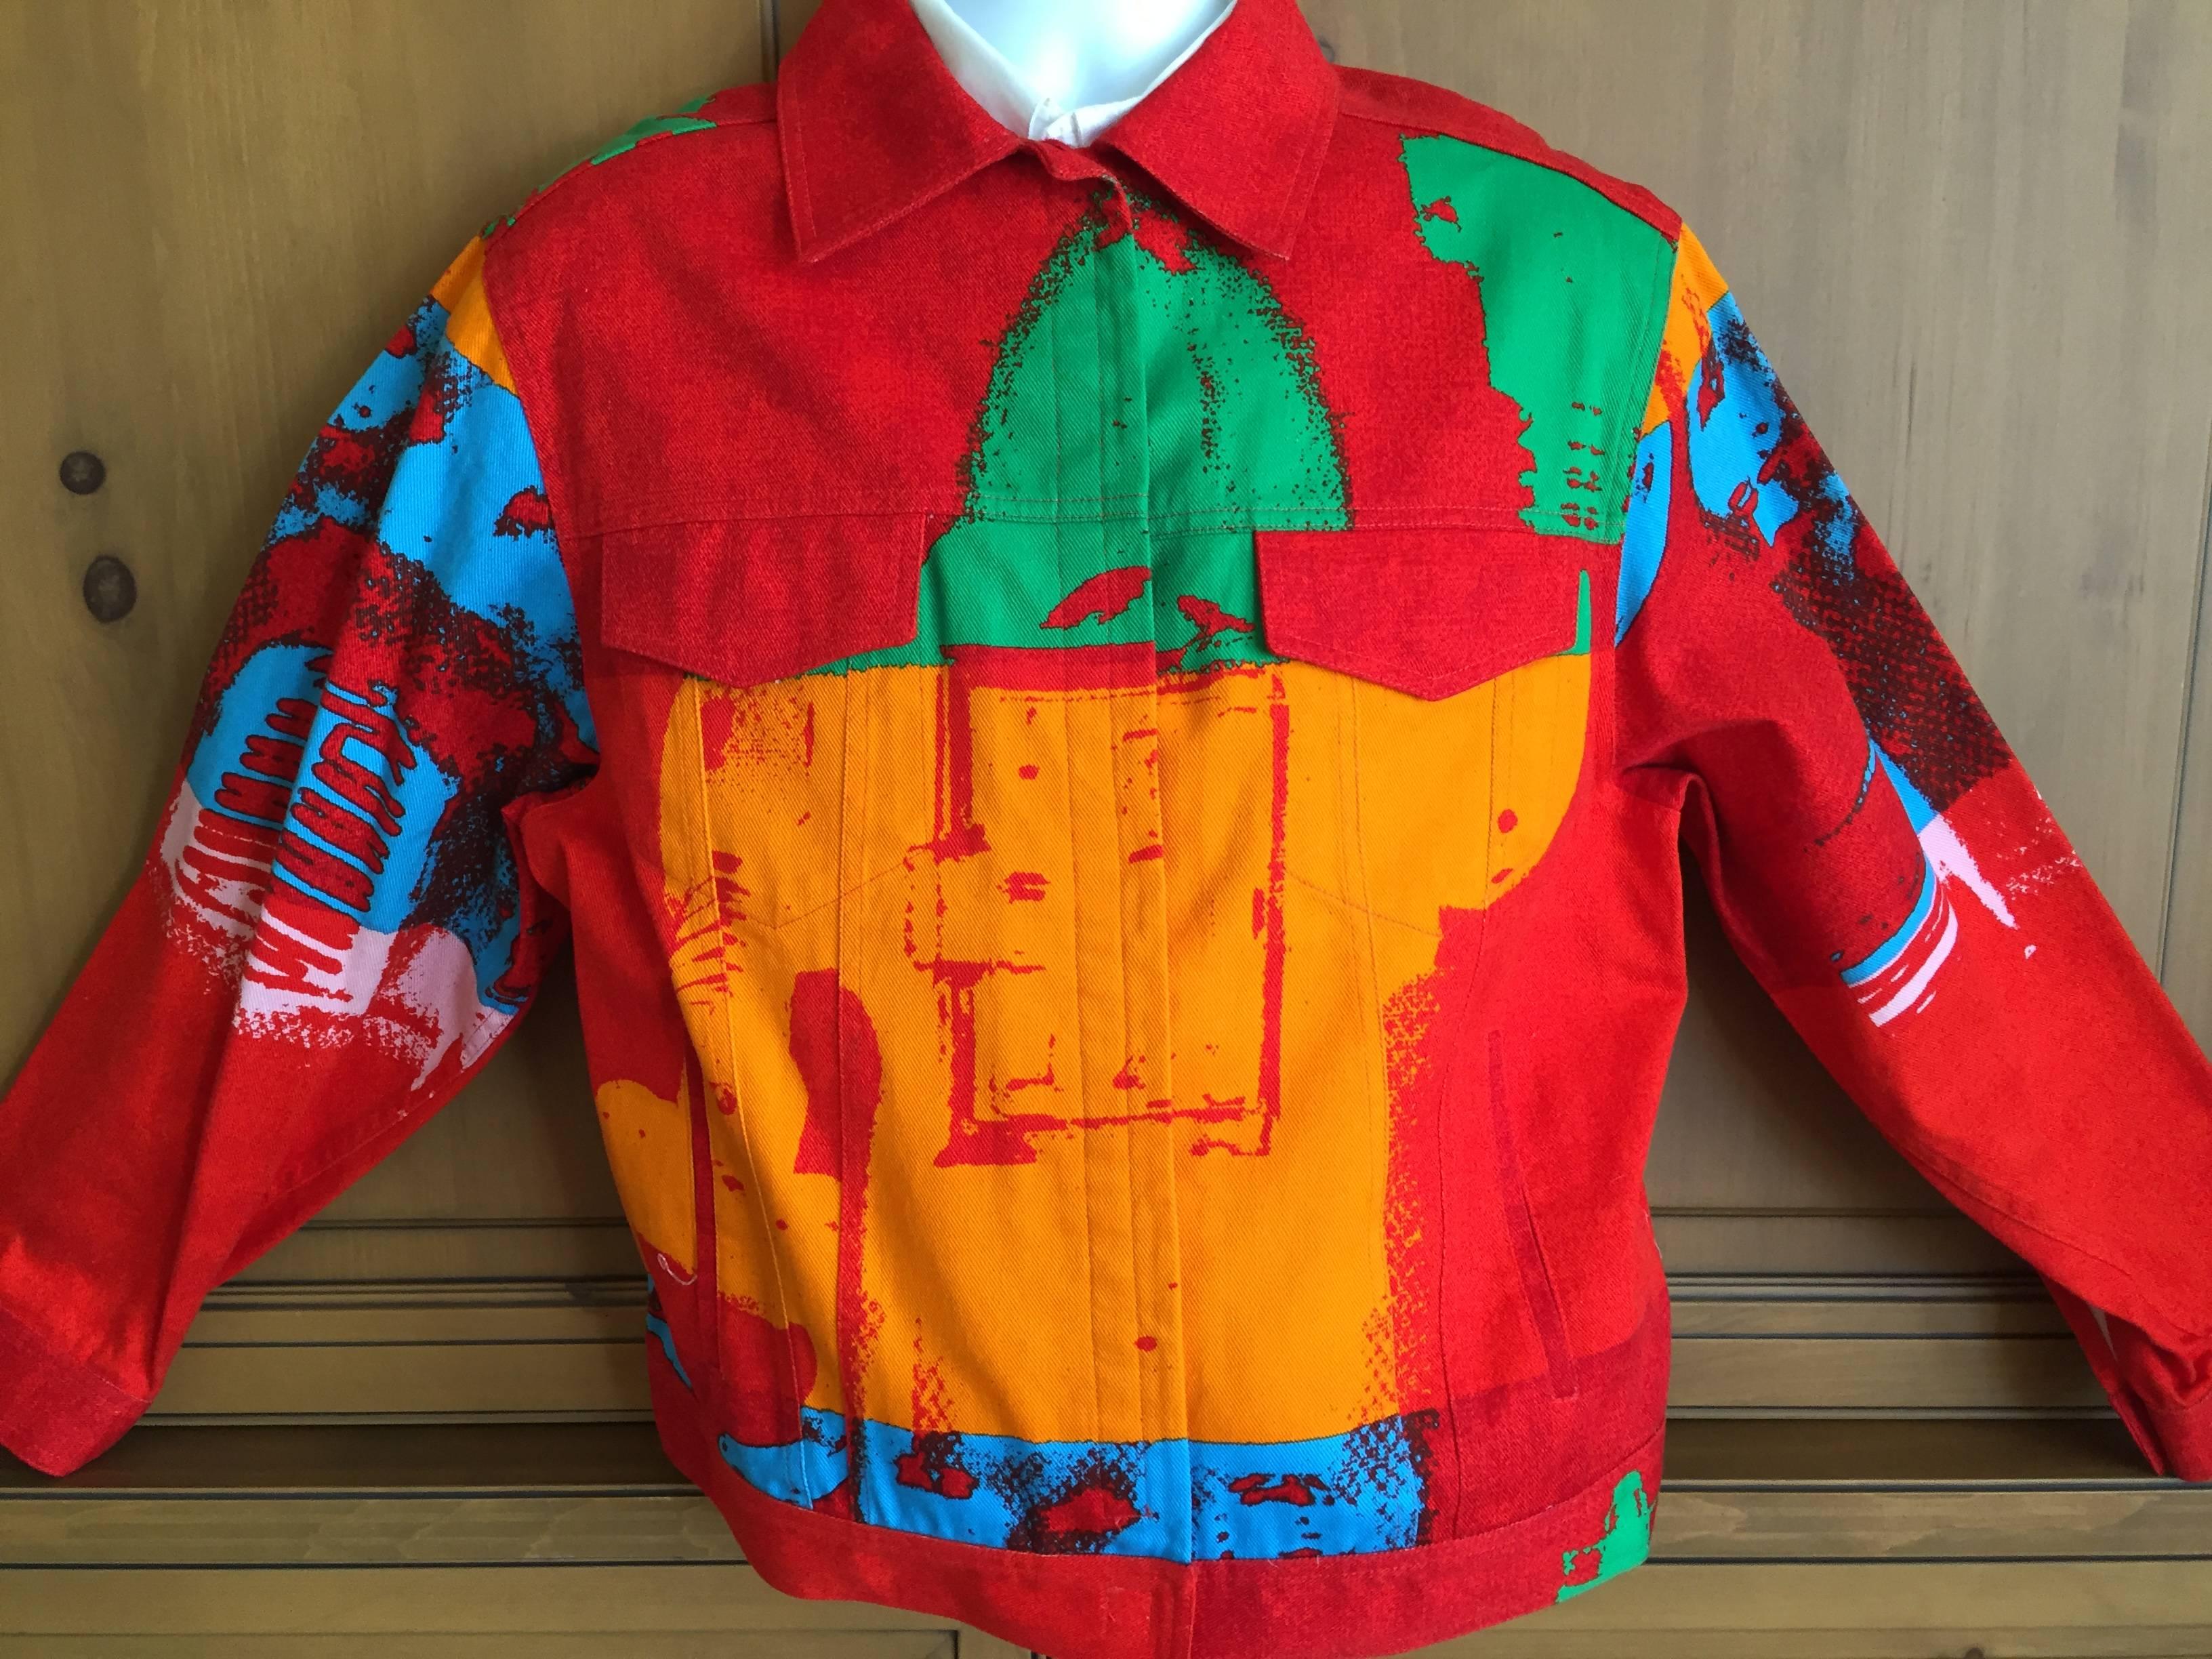 Colorful Andy Warhol print denim jacket from Stephen Sprouse circa 1999.
Sz 44
Chest 46